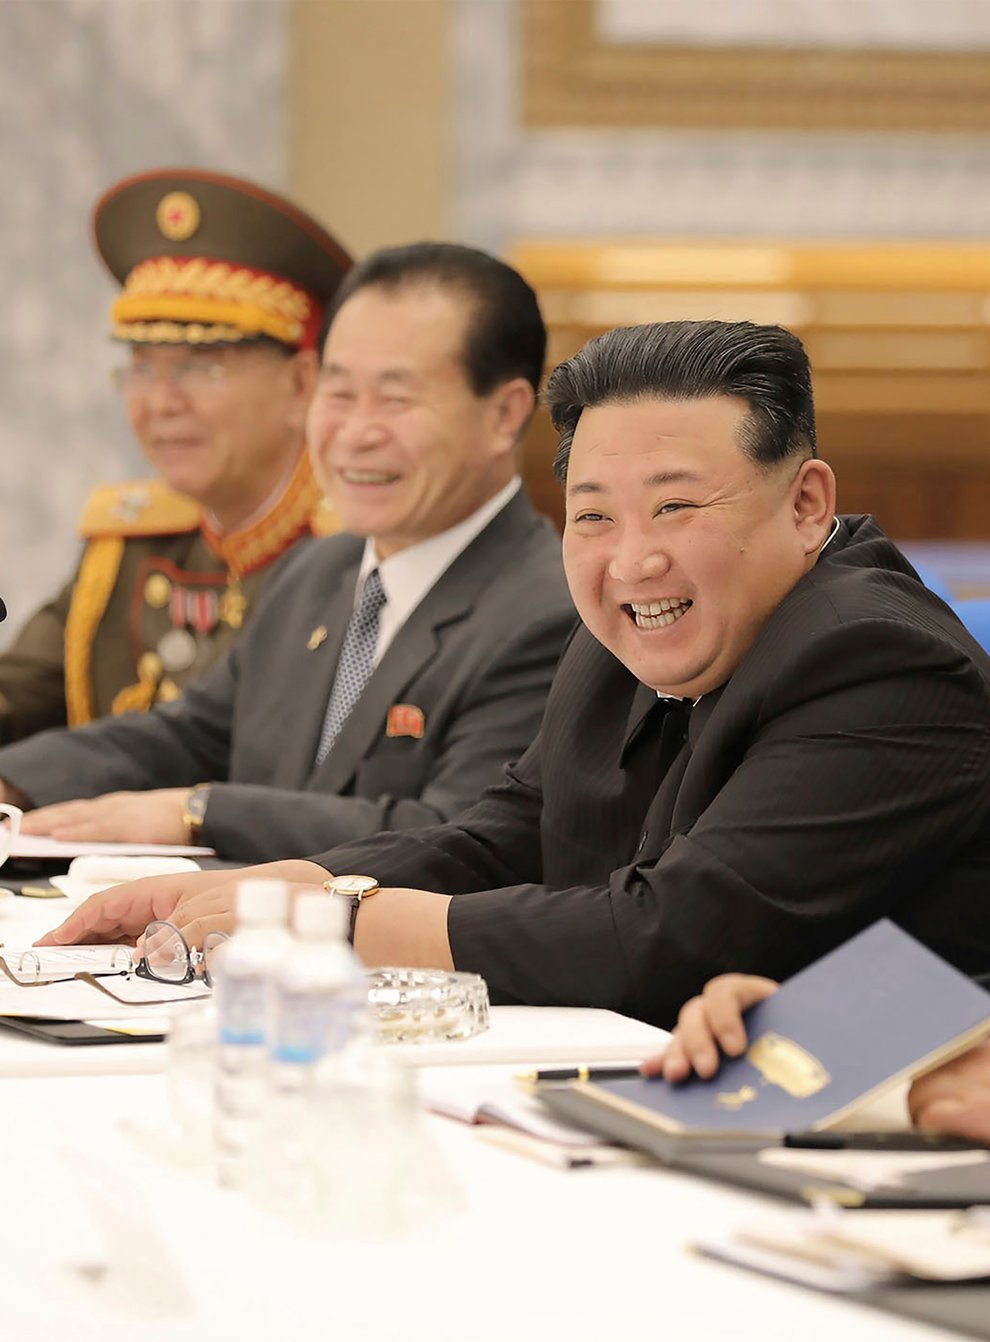 North Korean leader Kim Jong Un, centre, attends a meeting of the Central Military Commission of the ruling Workers’ Party in Pyongyang, North Korea (Korean Central News Agency/Korea News Service/AP)